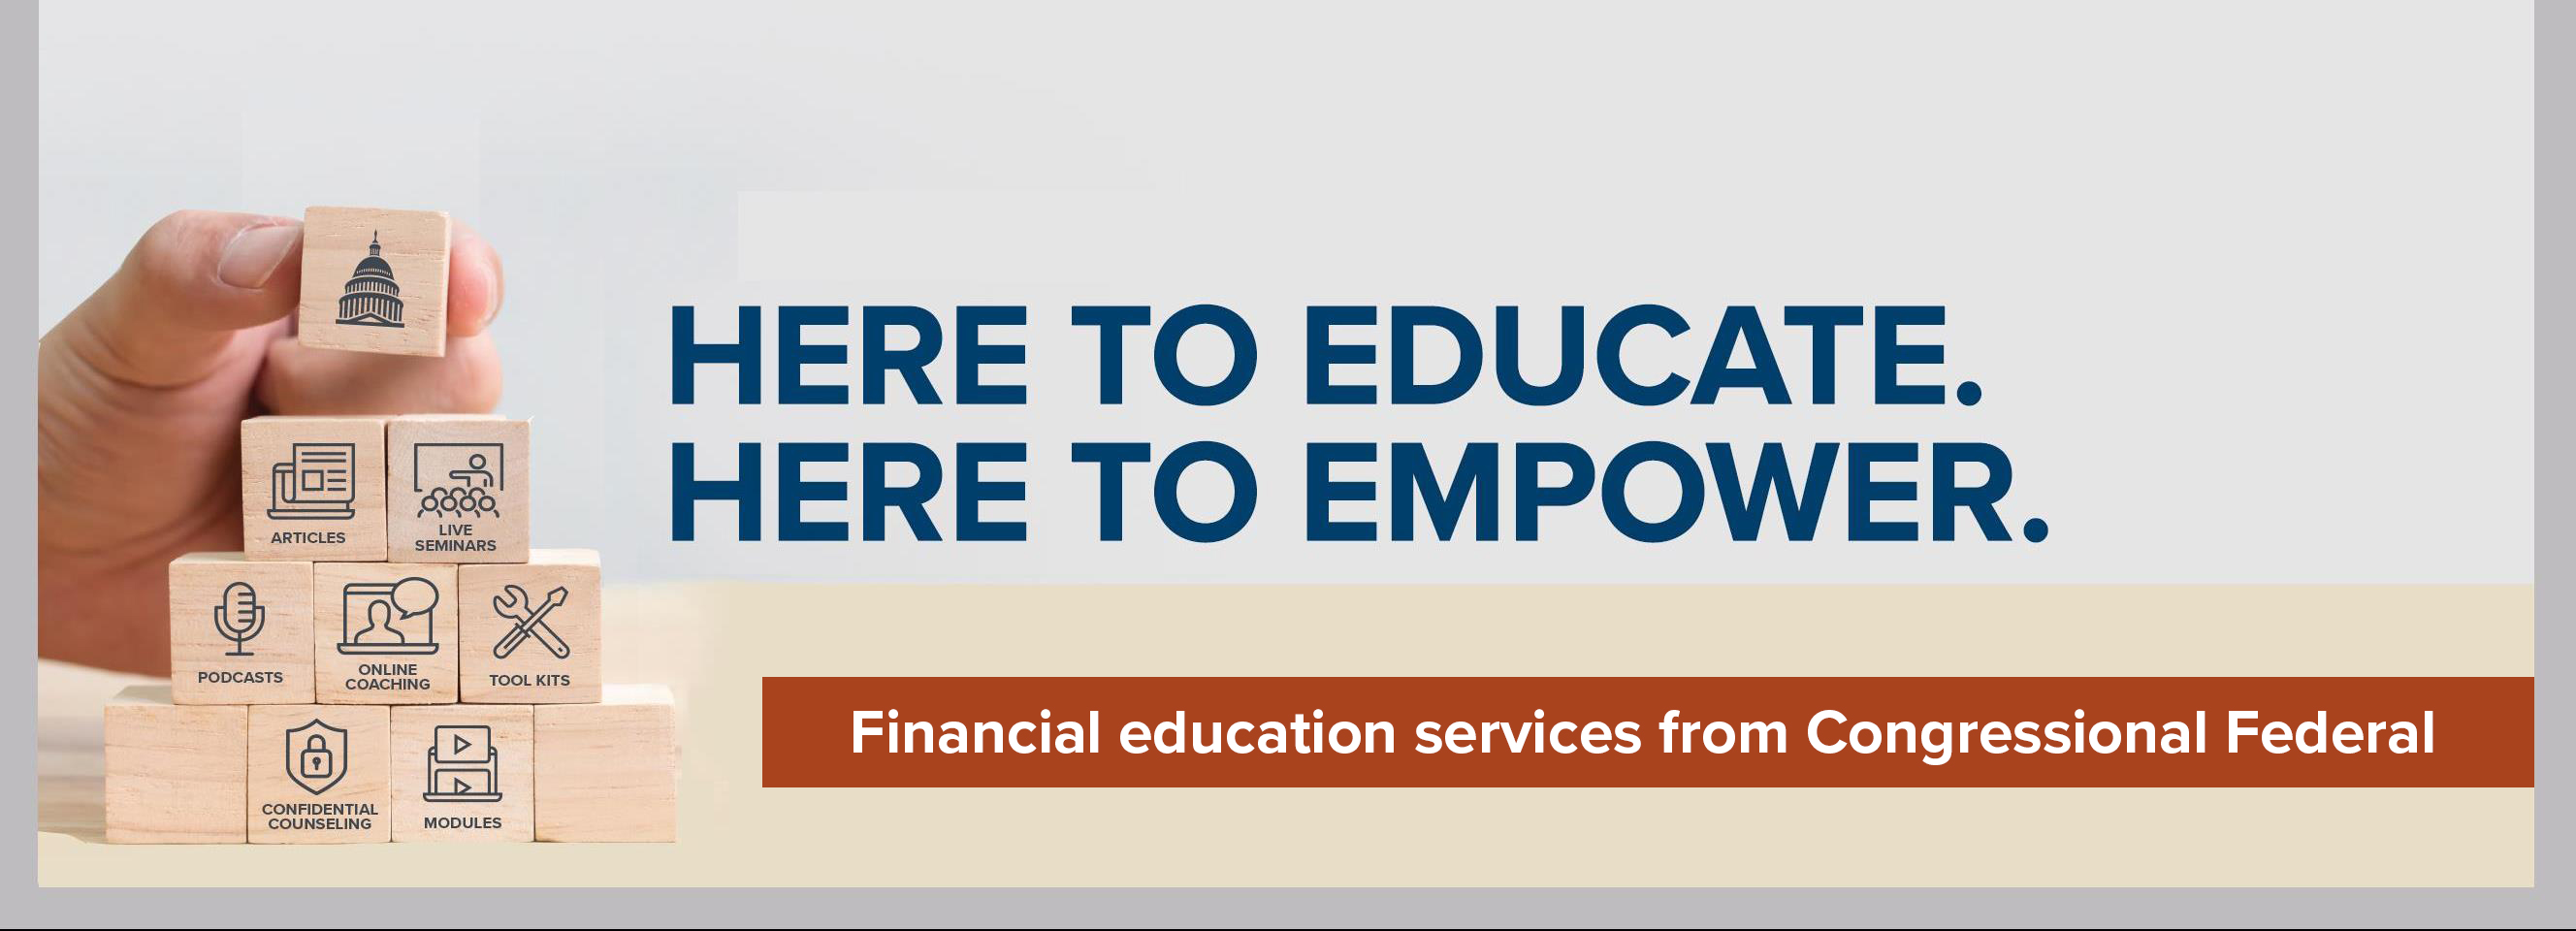 Here to Educate. Here to Empower. Financial education services from Congressional Federal